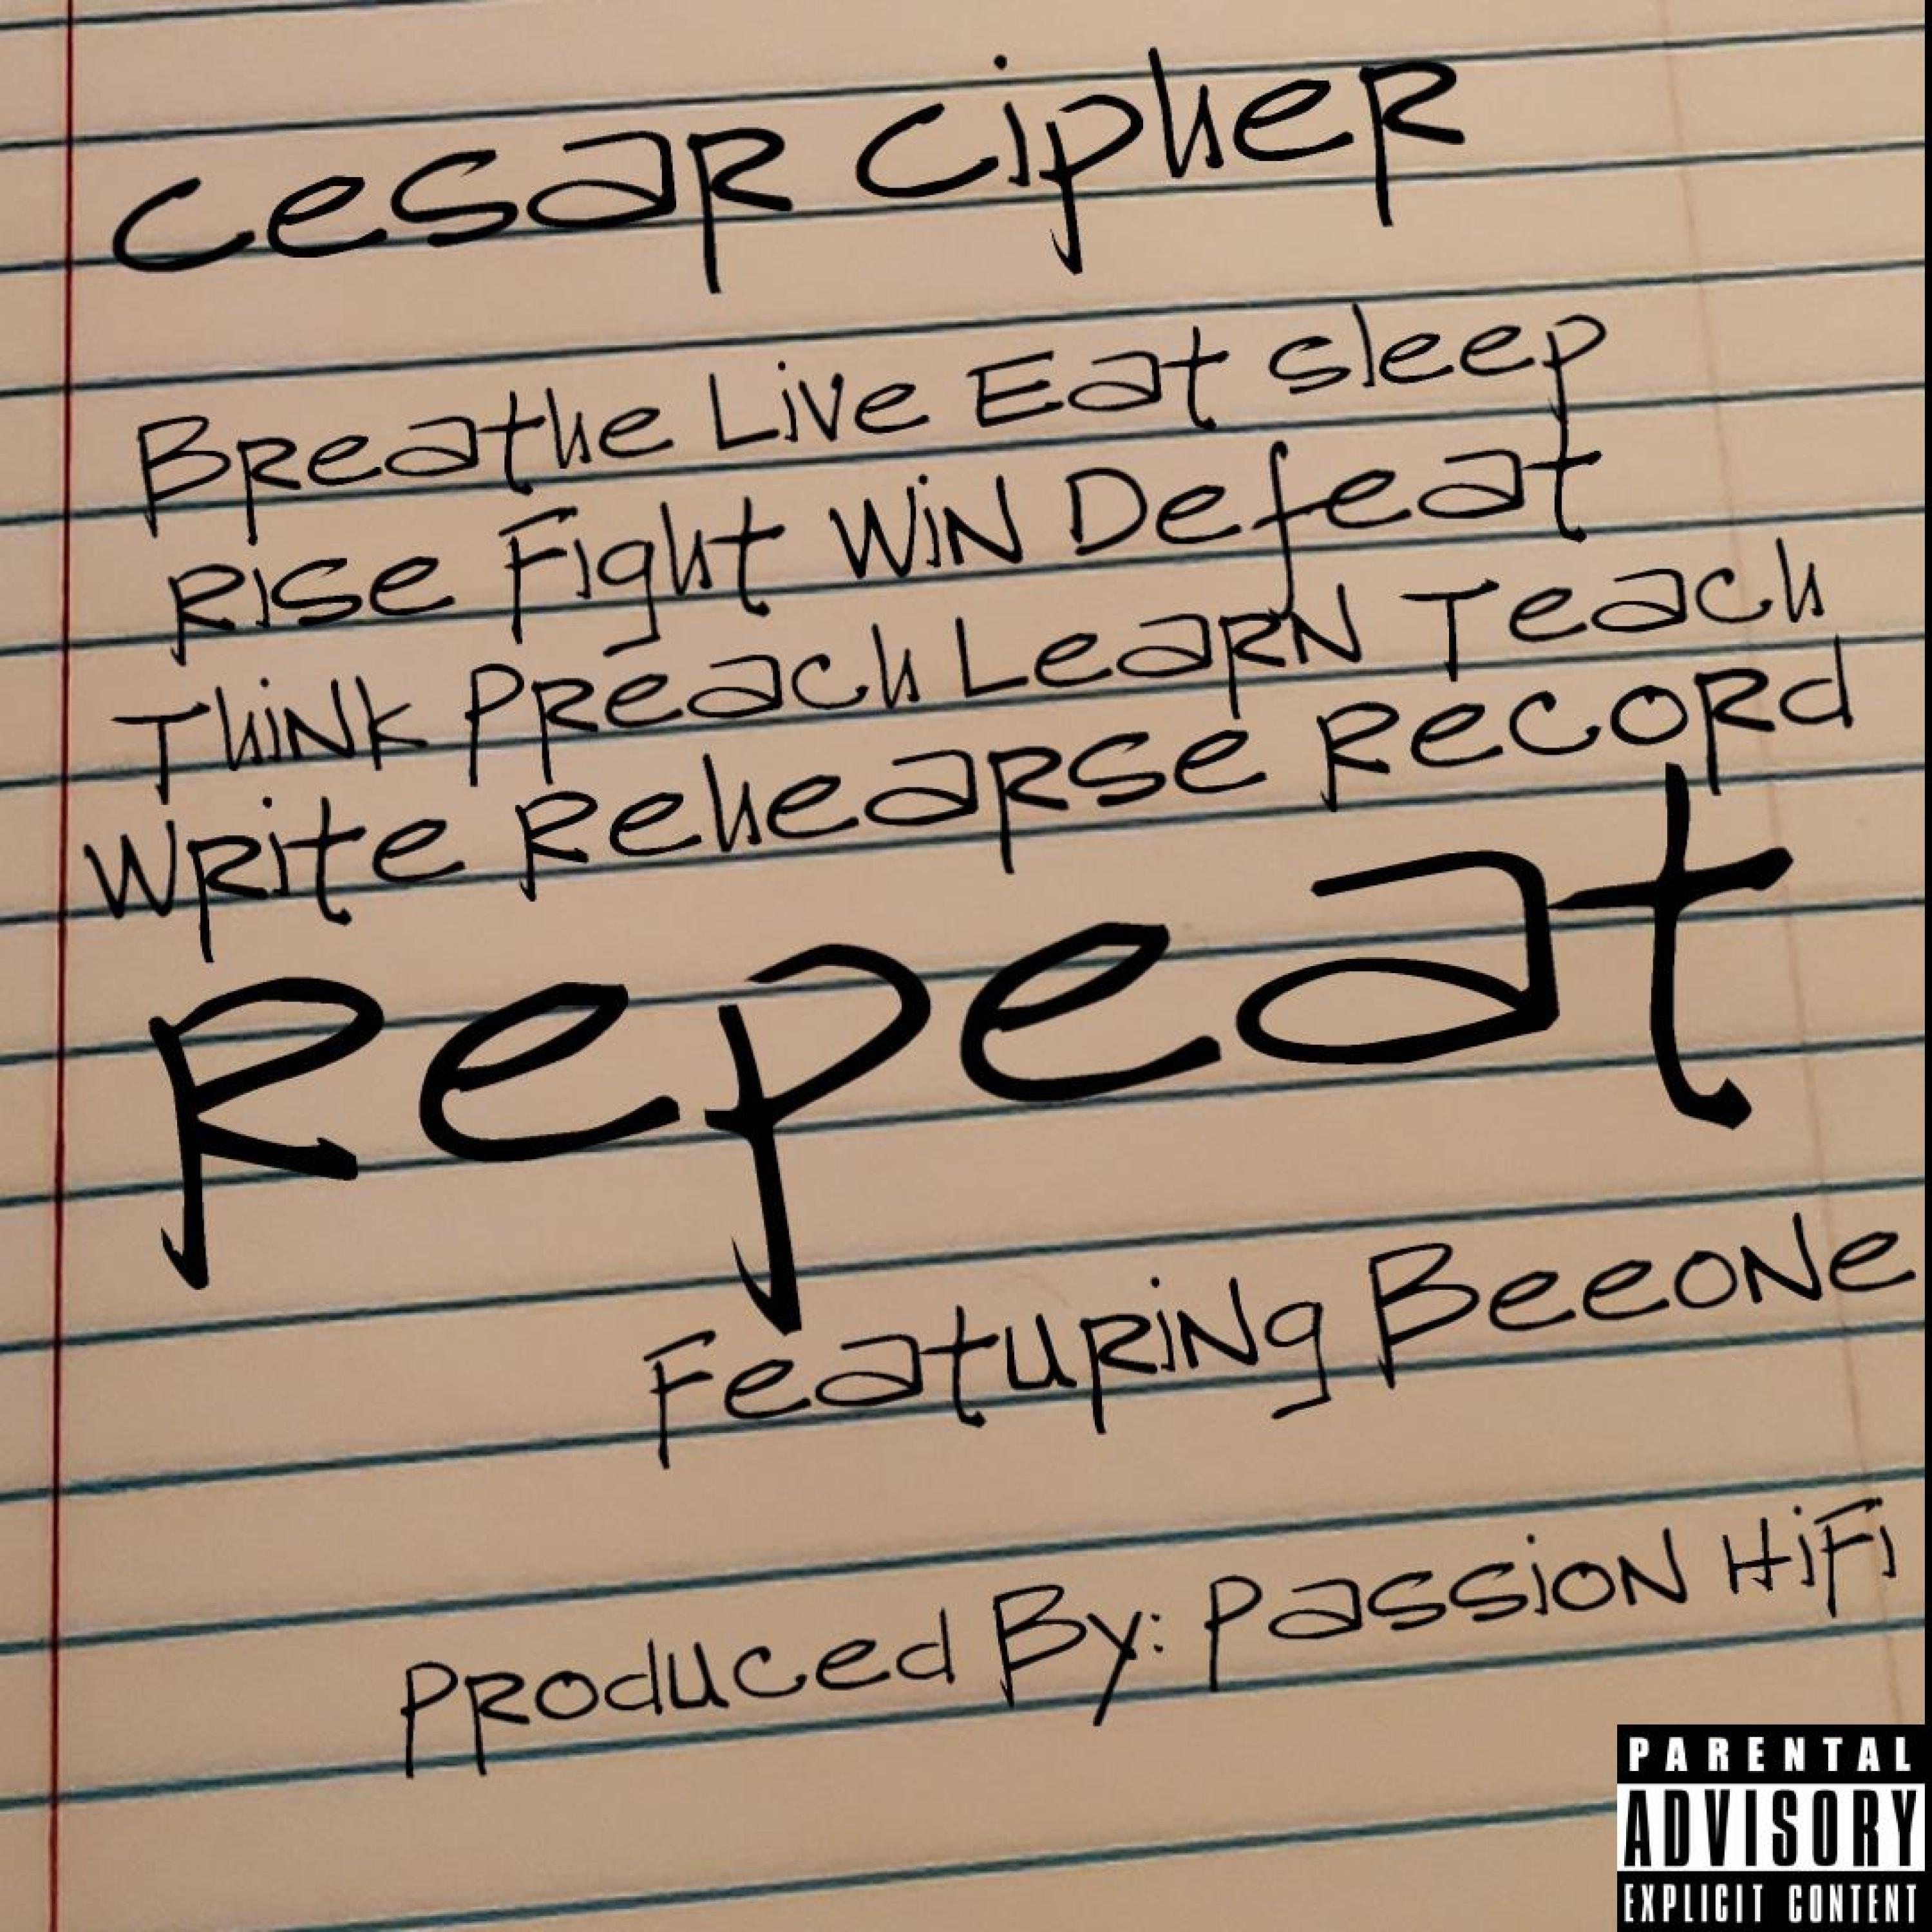 Cesar Cipher - Repeat (feat. BeeOne)